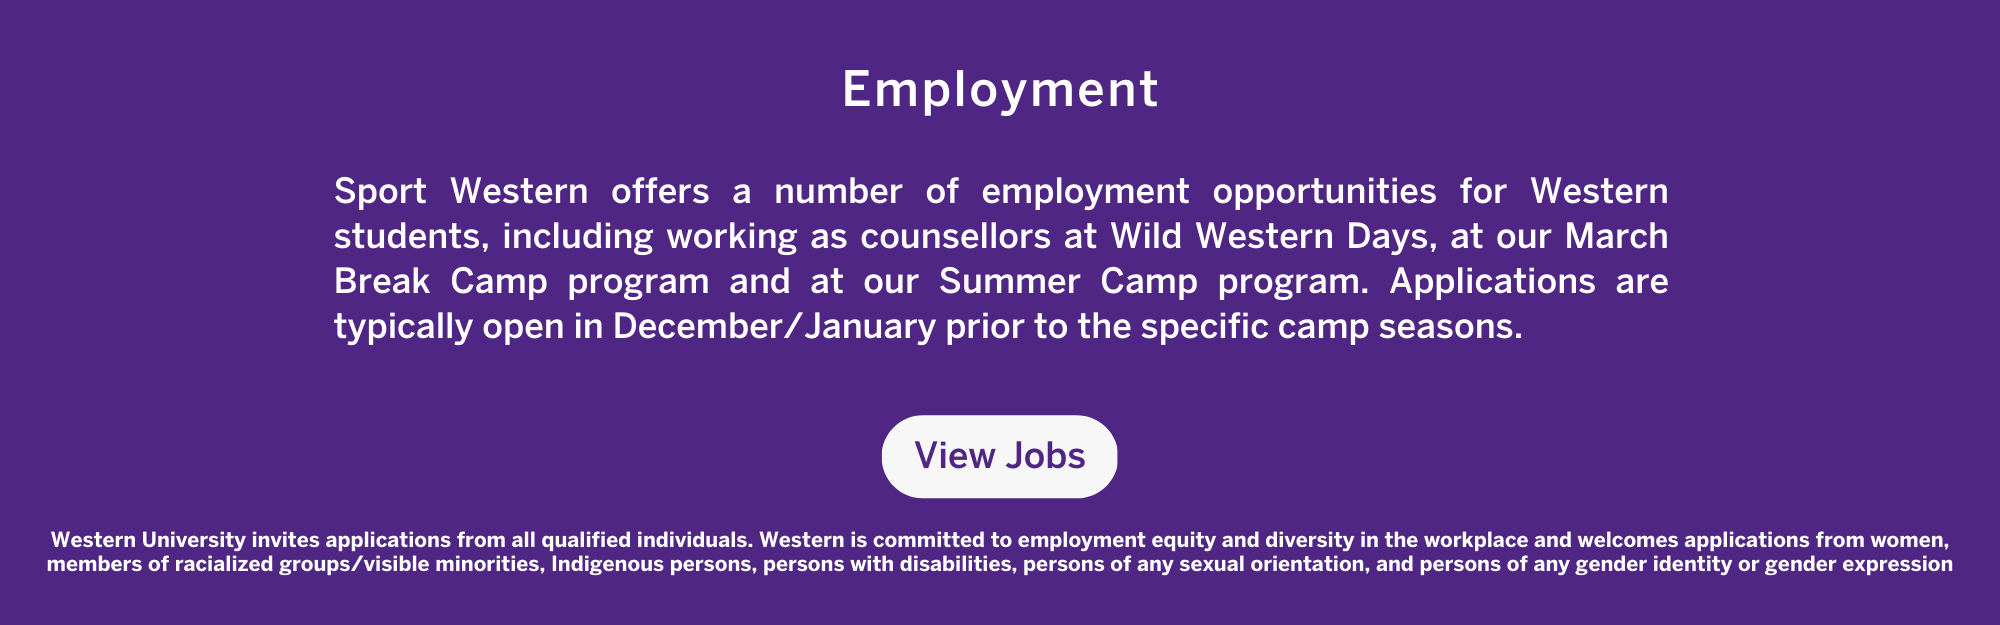 Employment  Sport Western offers a number of employment opportunities for Western students serving as counsellors at Wild Western Days, as well as our March Break and Summer Camp programs. Applications are typically accepted in the December/January prior to a camp season.